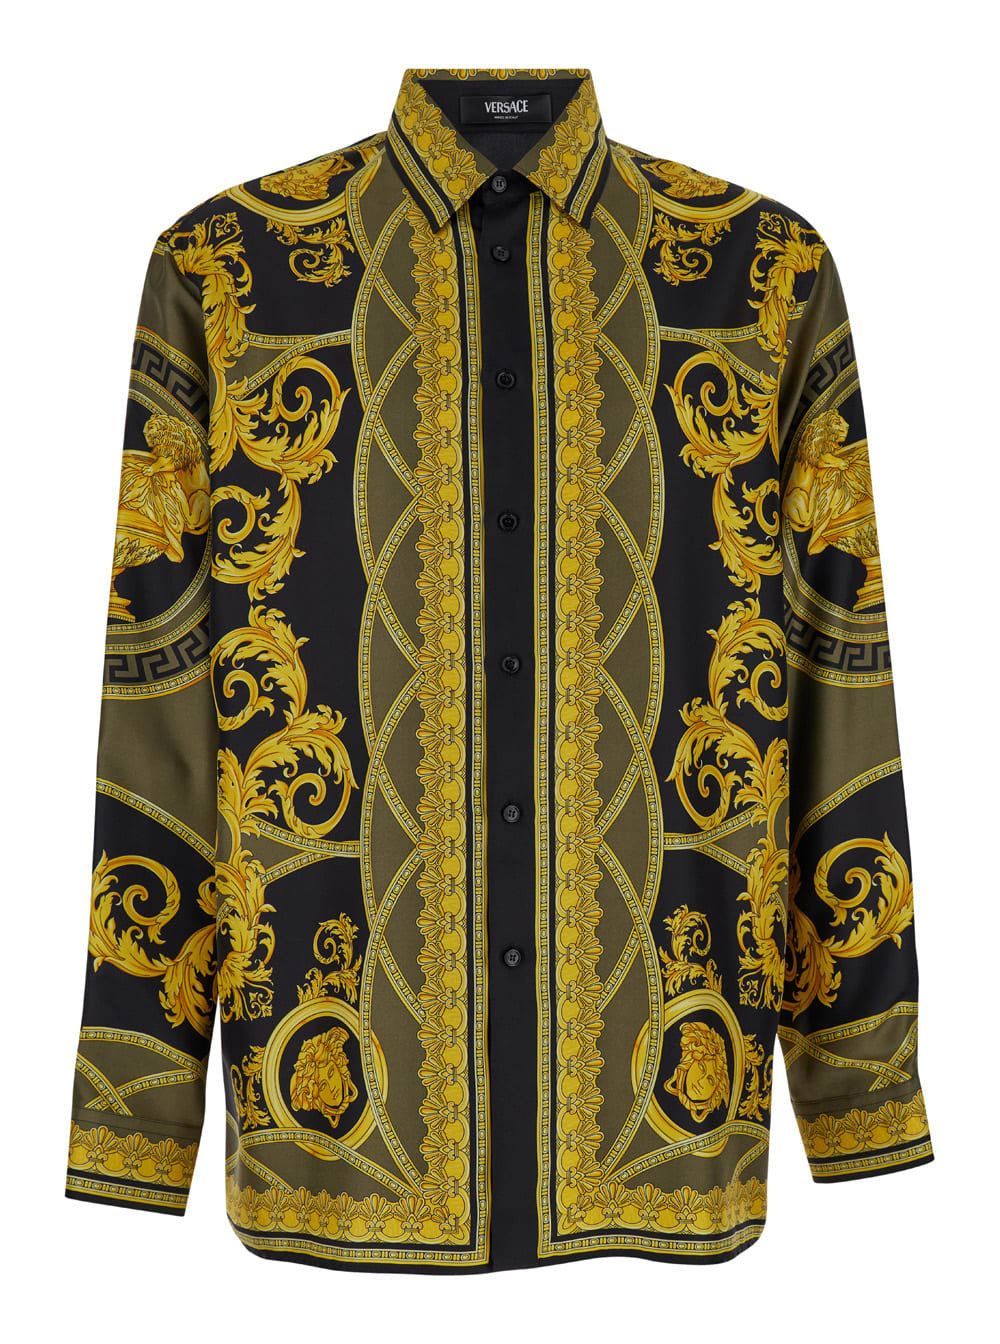 Black And Yellow Shirt With Barocco Print In Silk Man